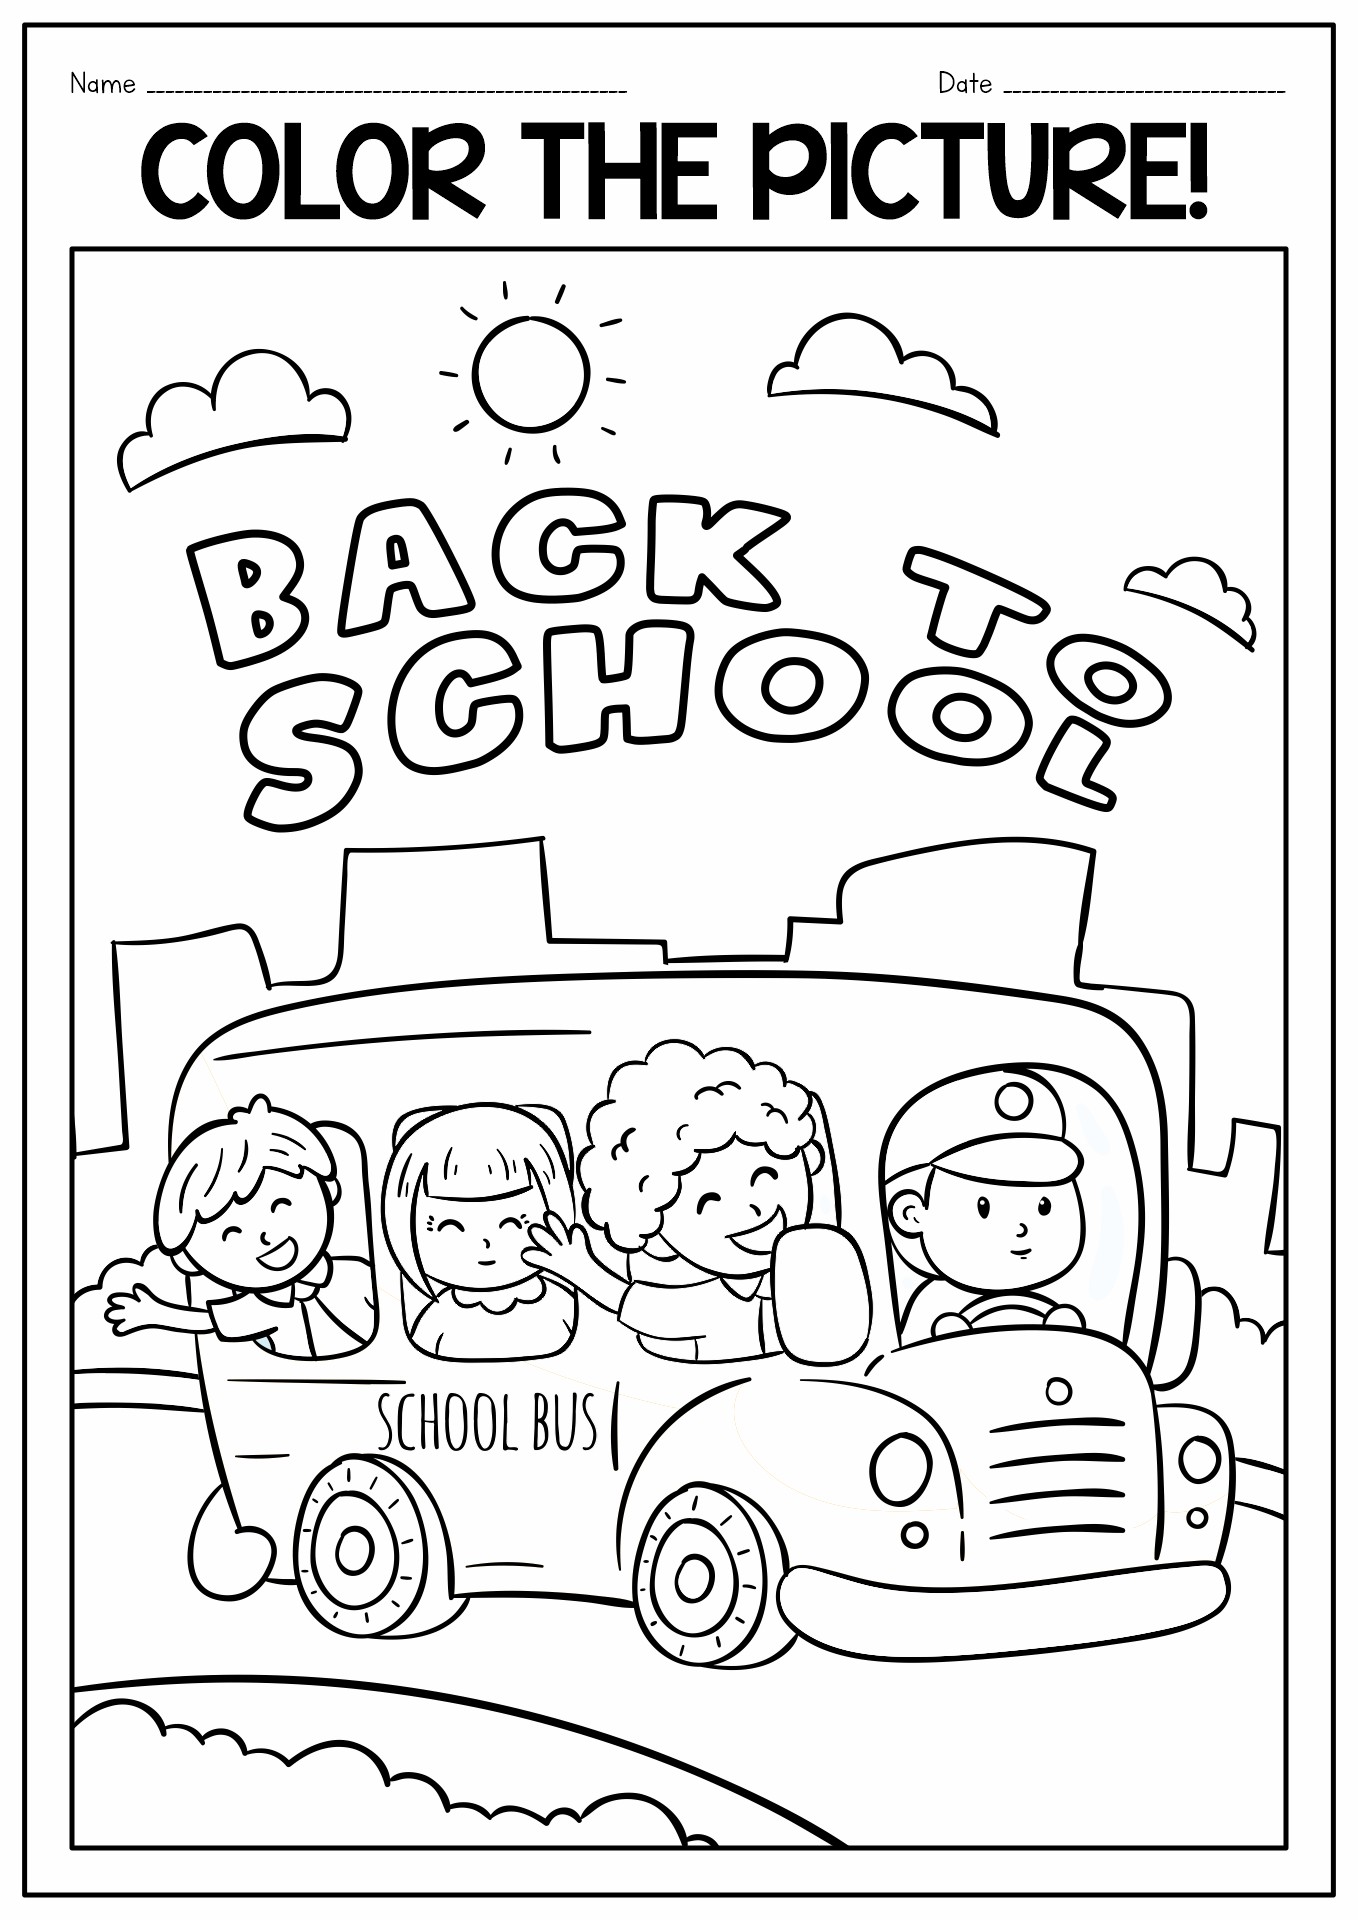 Back to School Coloring Pages Printable Free Image